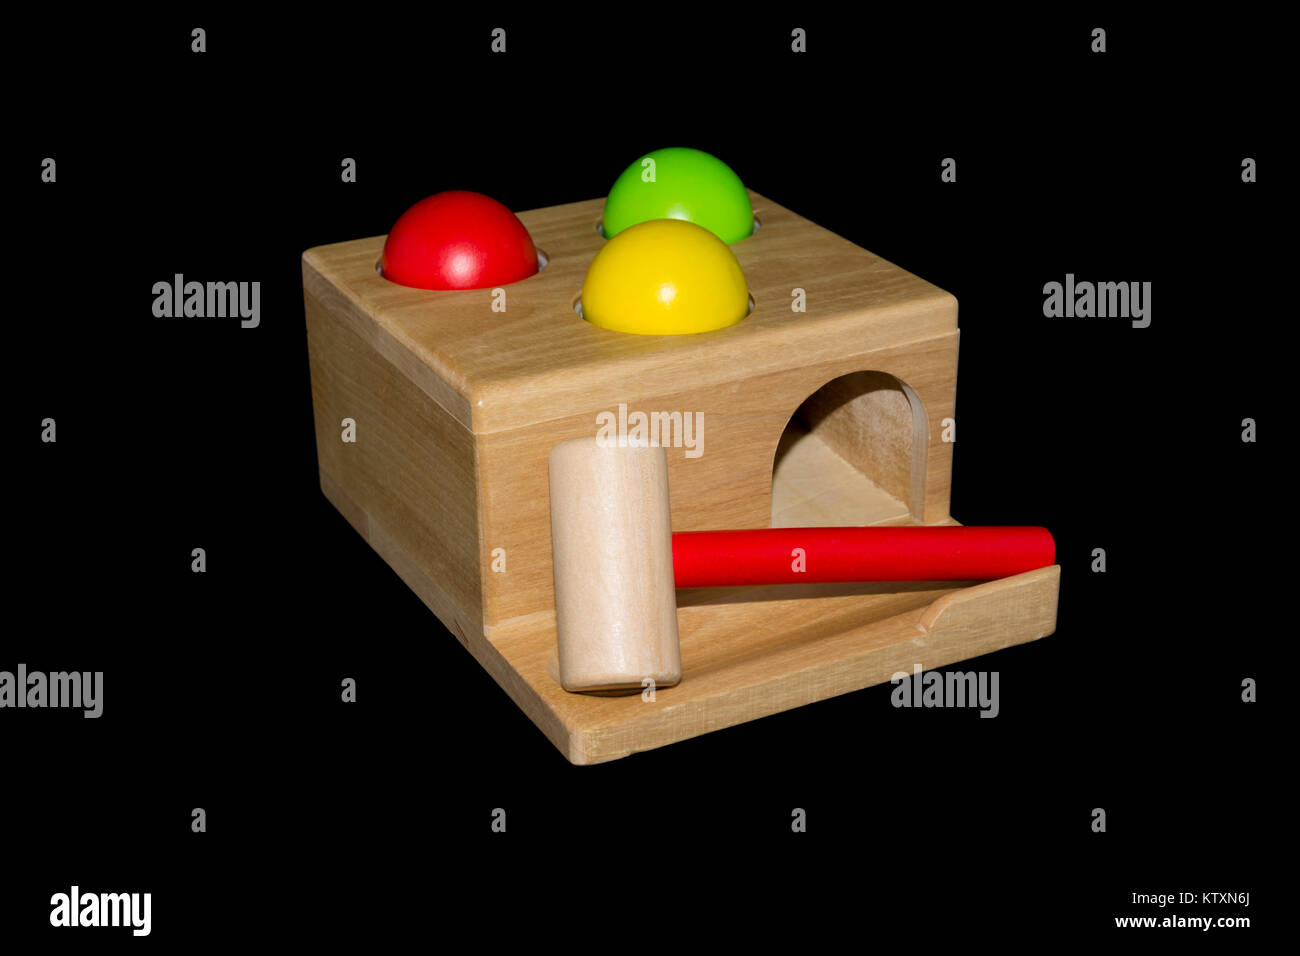 A wooden hammering toy with three coloured balls and a hammer isolated against a black background Stock Photo